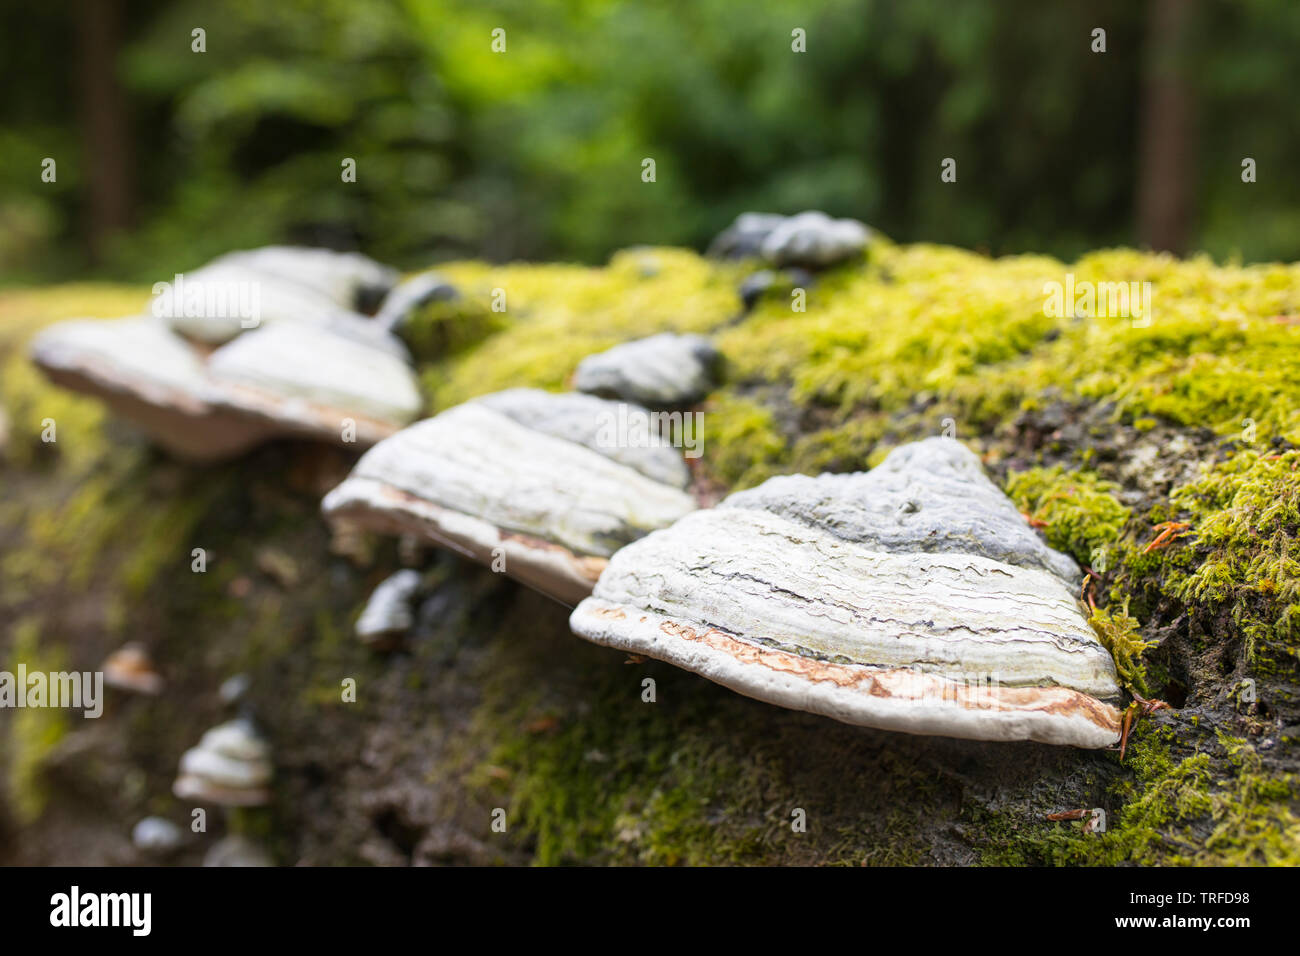 Tinder mushrooms in a forest, mushroom bench in Belgium Ardennes Stock Photo